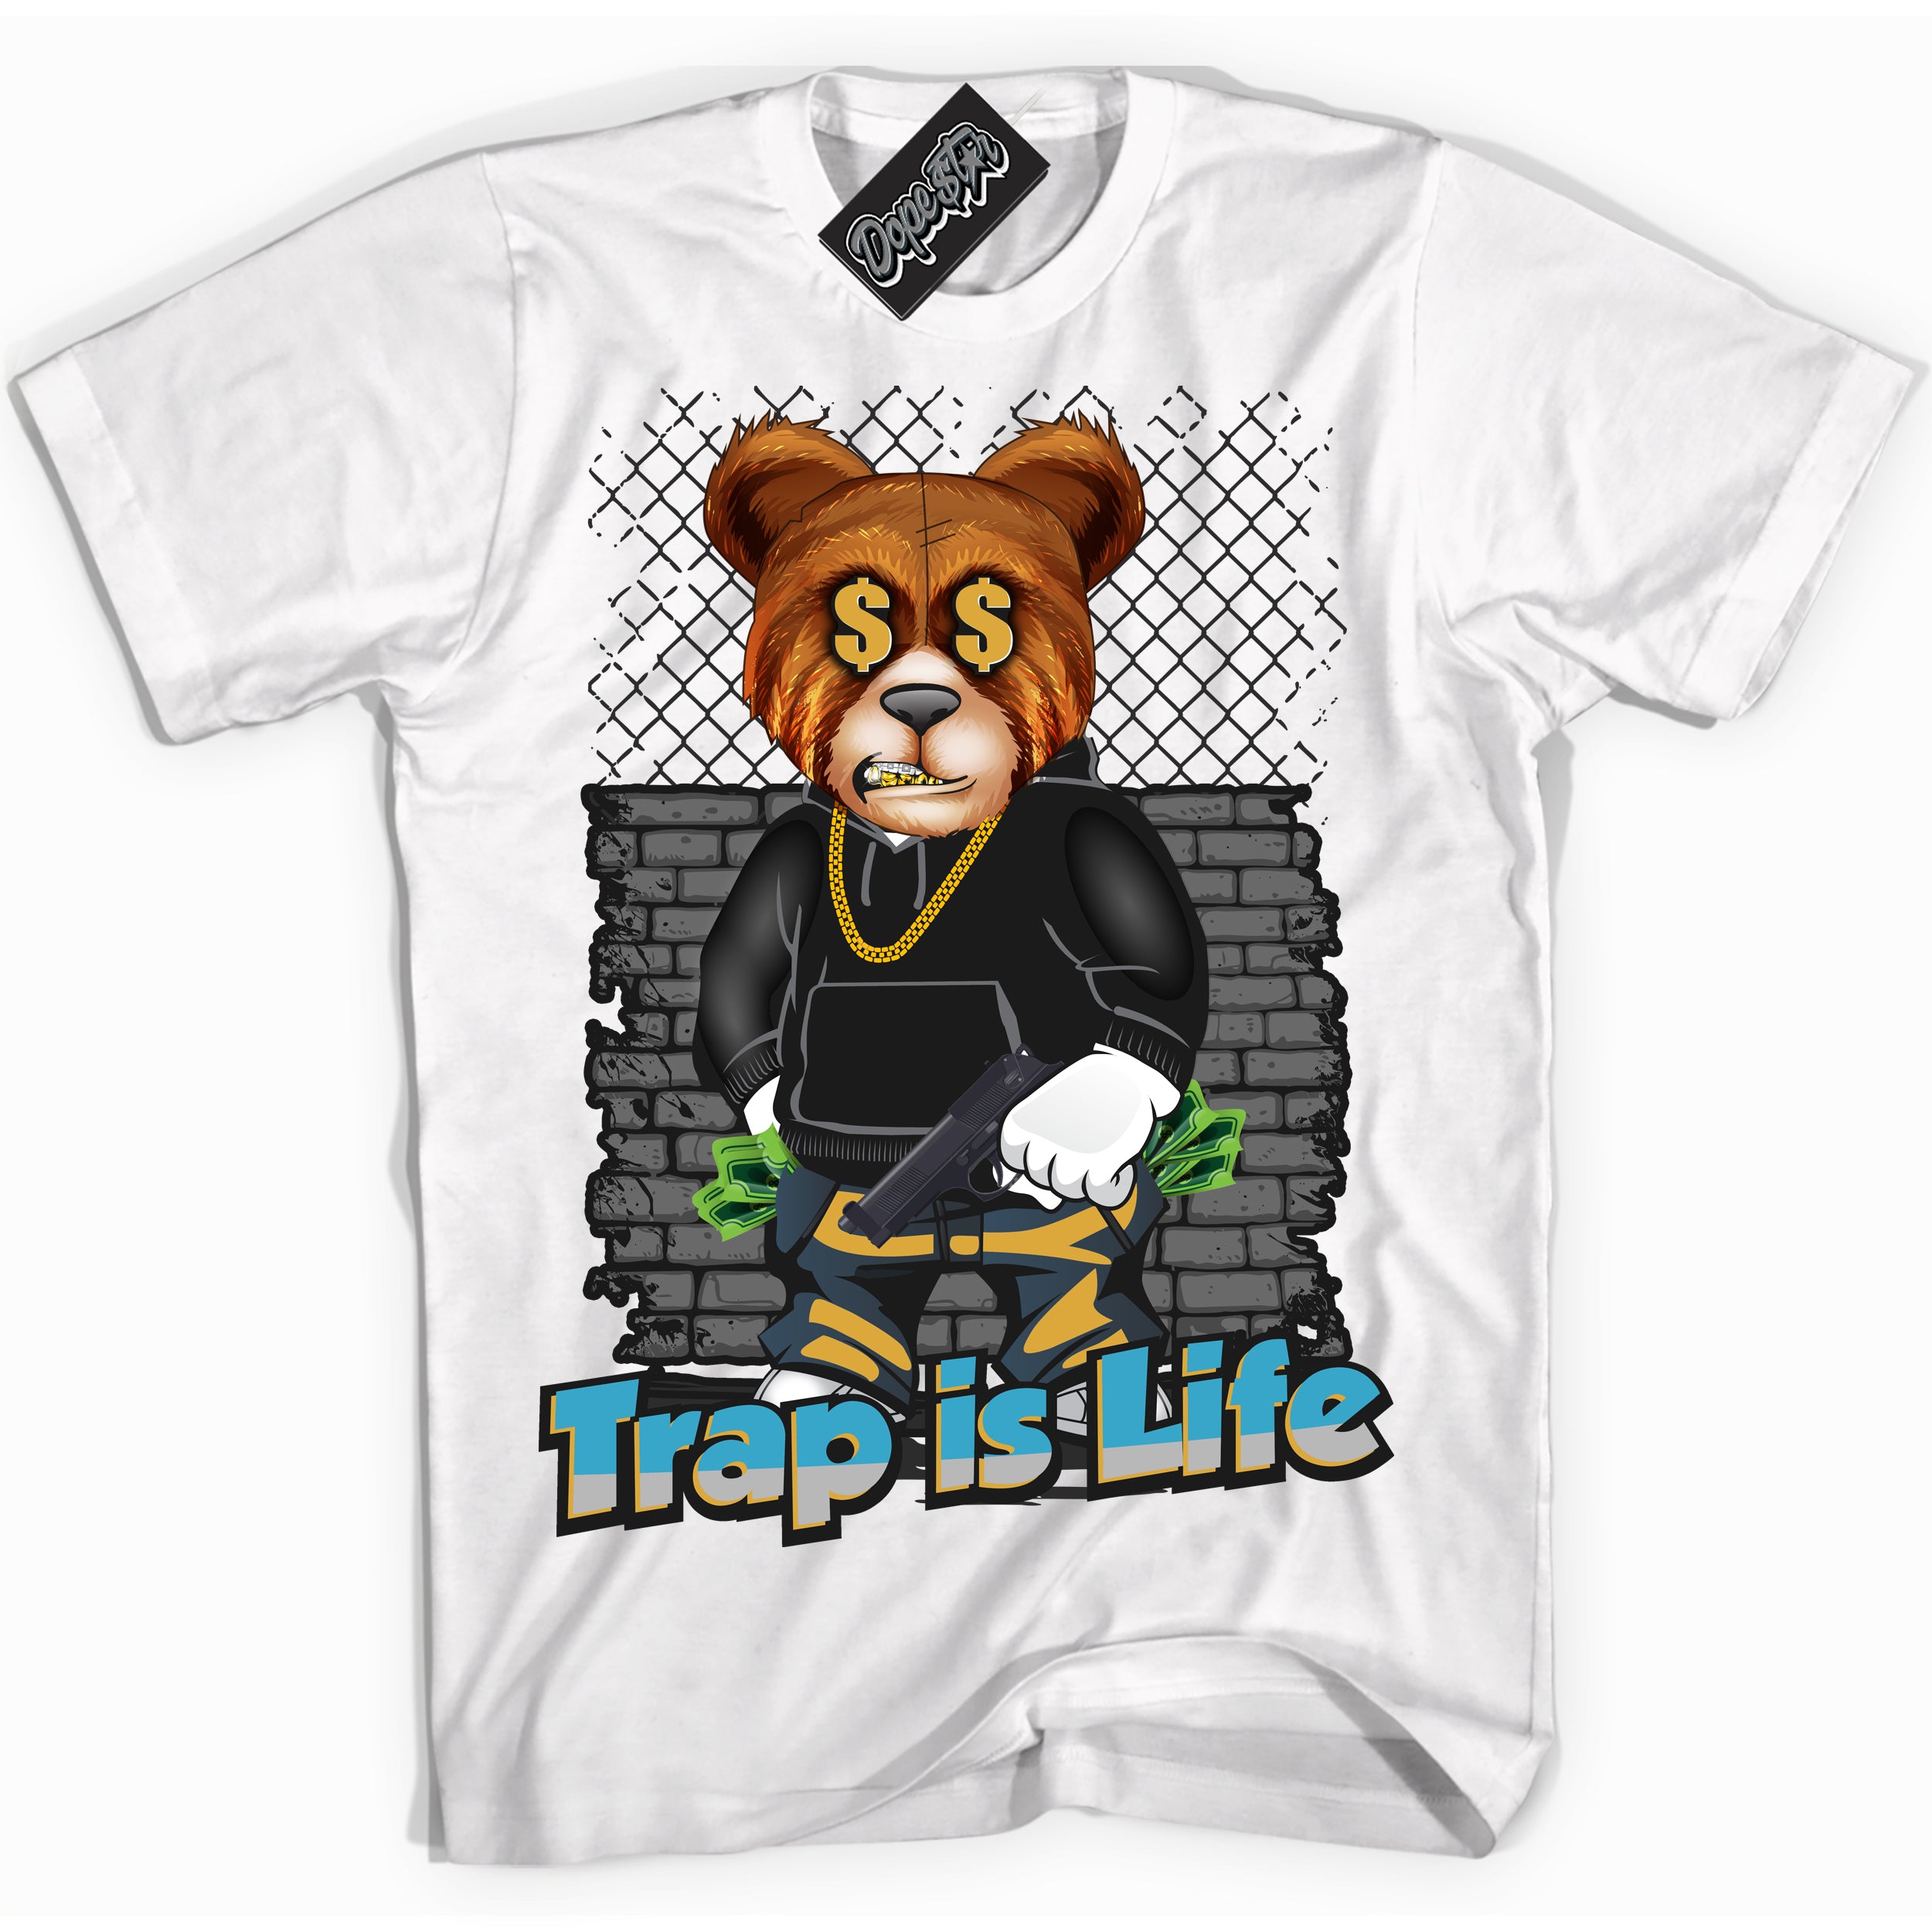 Cool White Shirt with “ Trap Is Life” design that perfectly matches Aqua 5s Sneakers.